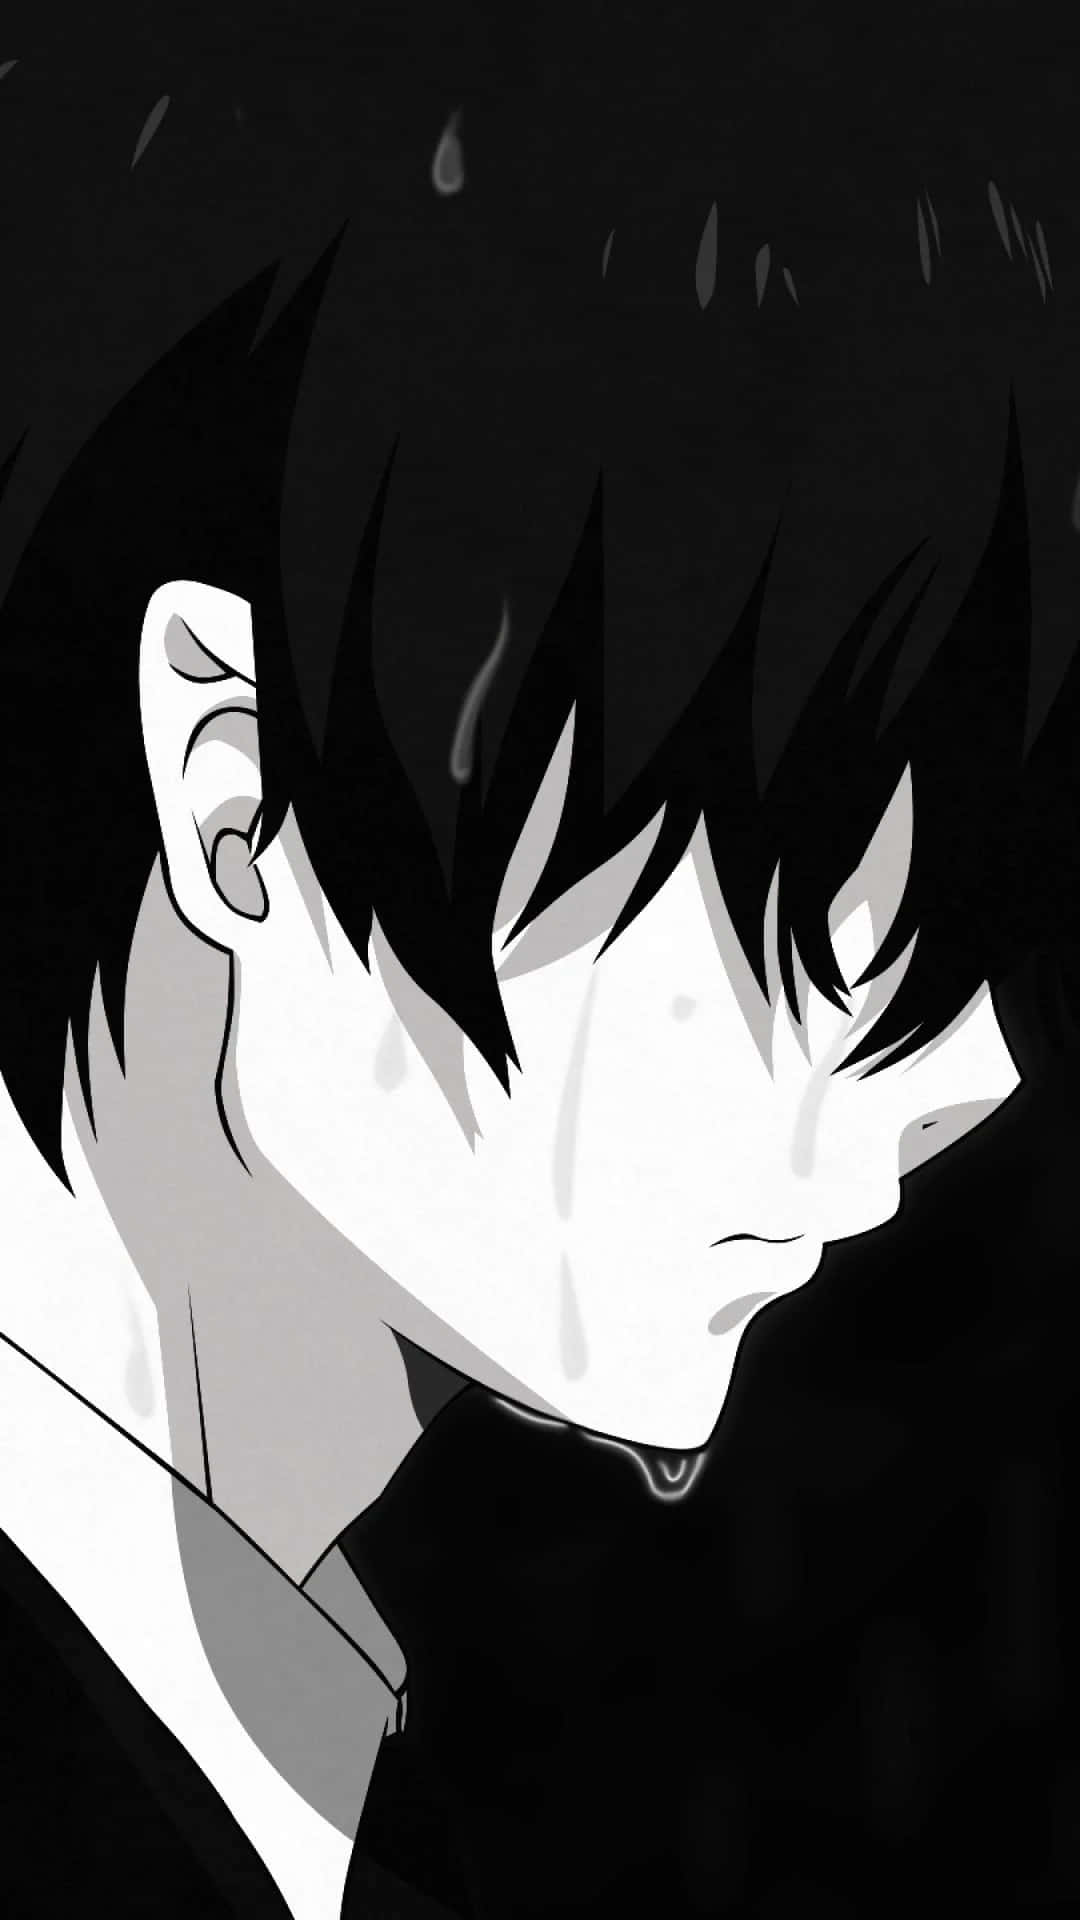 A Black And White Image Of An Anime Character